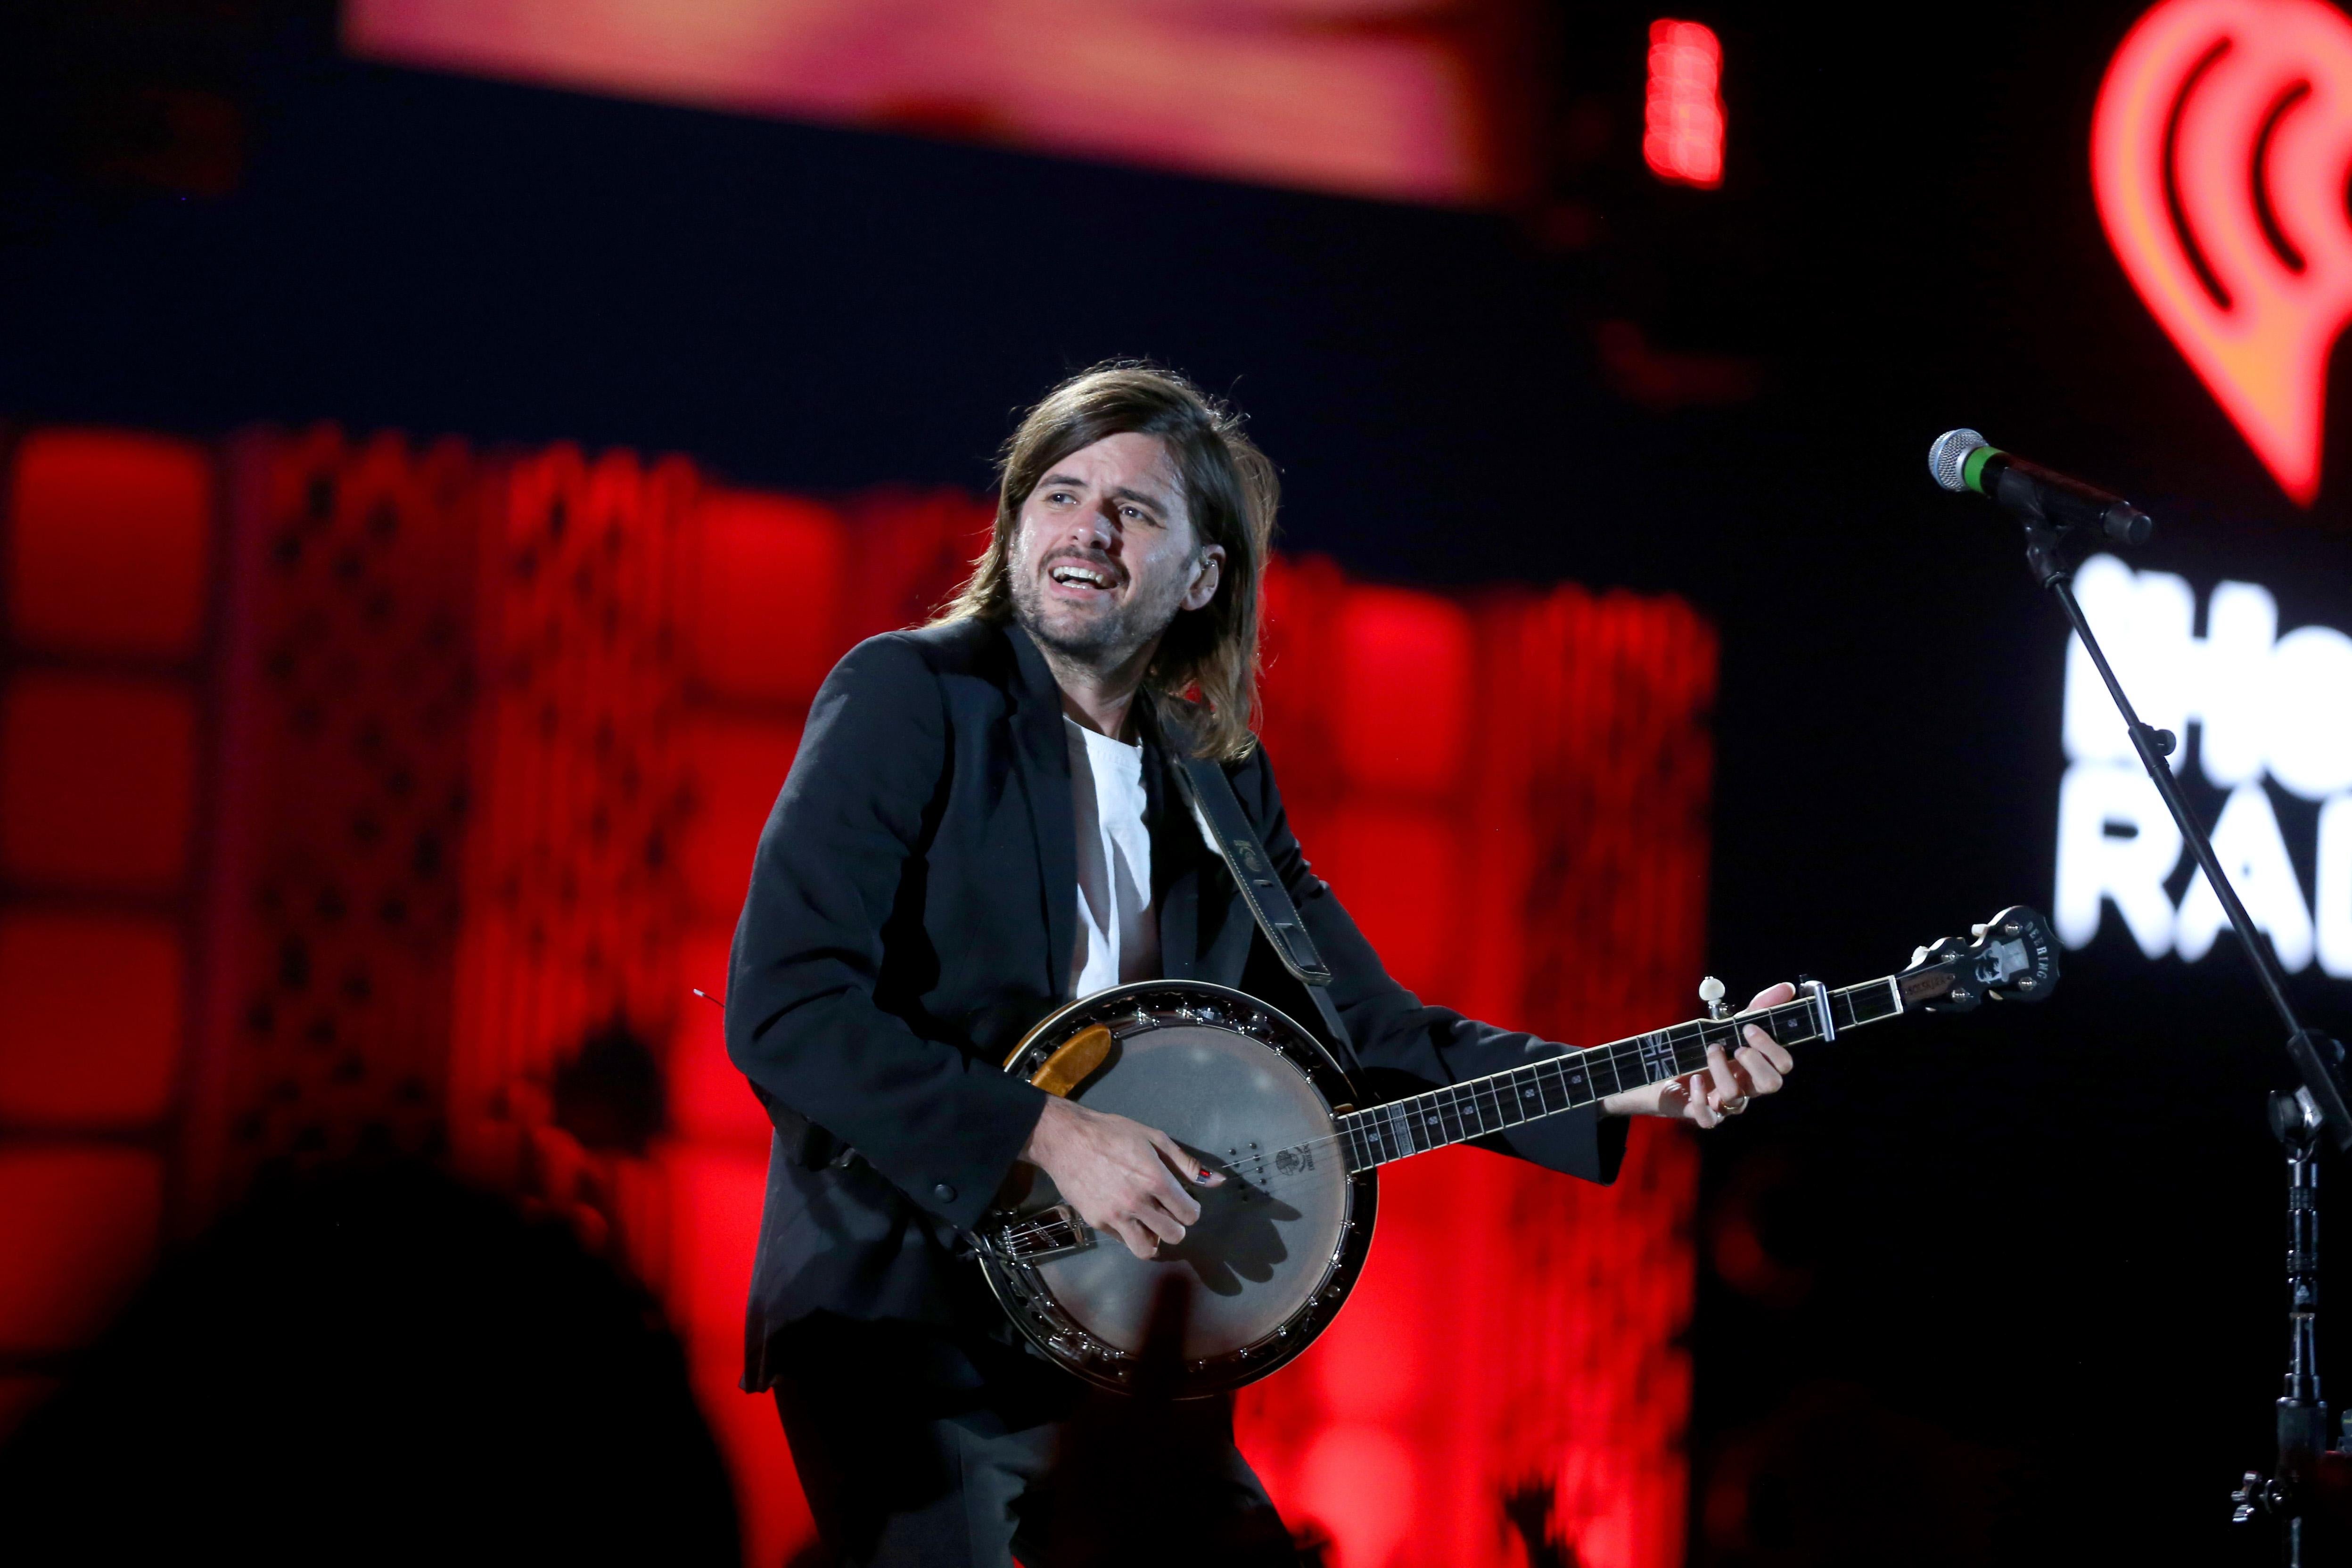 A man with long hair plays a banjo while wearing a black blazer and white T-shirt. He is on stage with a bright red light behind him. 